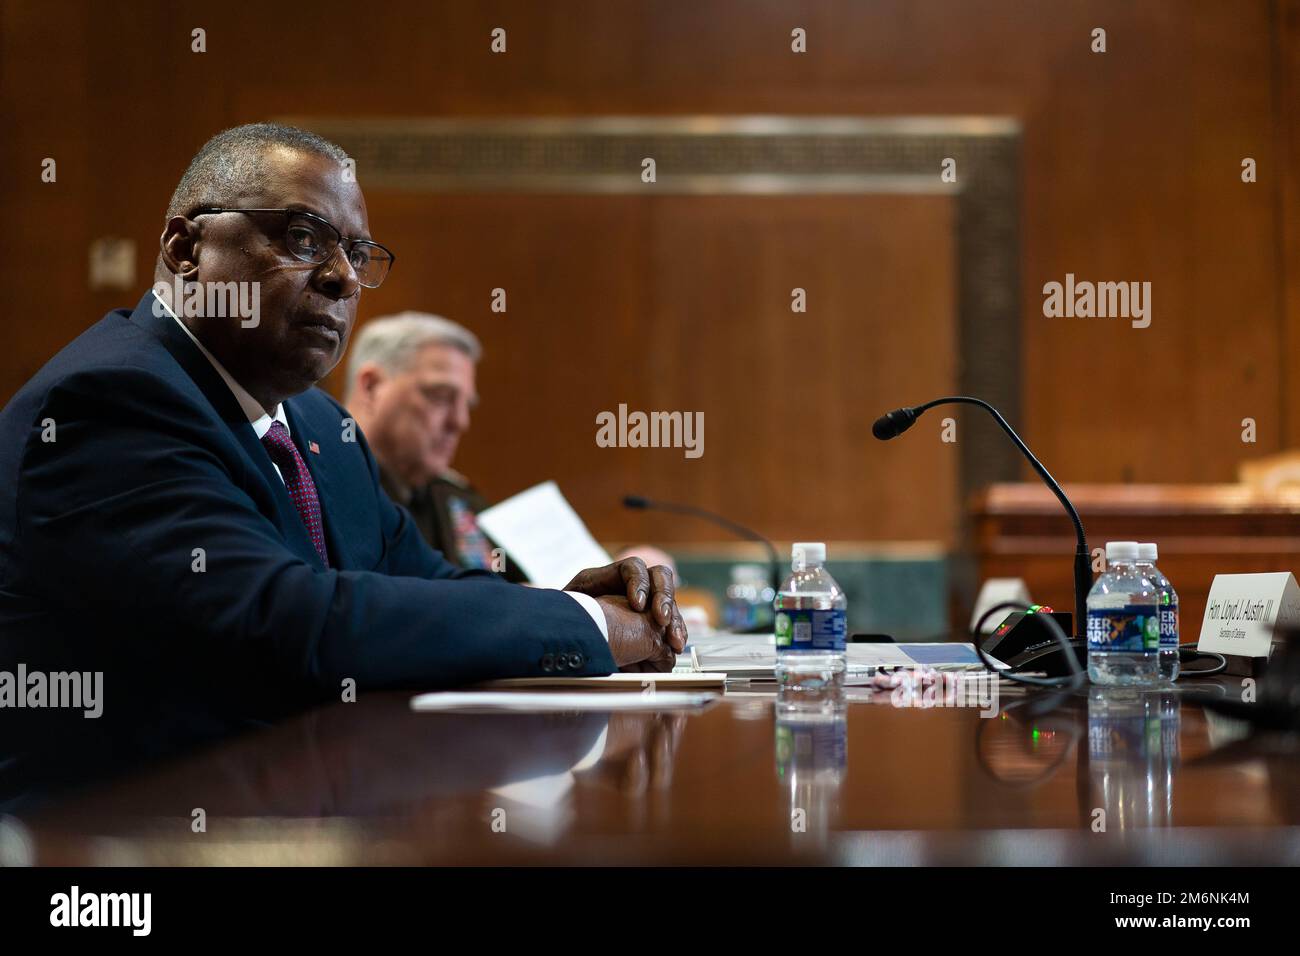 Secretary of Defense Lloyd J. Austin III and Army Gen. Mark A. Milley, chairman of the Joint Chiefs of Staff, testify at a Senate Appropriations Subcommittee on Defense hearing on the fiscal 2023 funding request and budget justification for the Department of Defense at the Dirksen Senate Office Building, Washington D.C., May 3, 2022. (DOD Photo by Navy Chief Petty Officer Carlos M. Vazquez II) Stock Photo